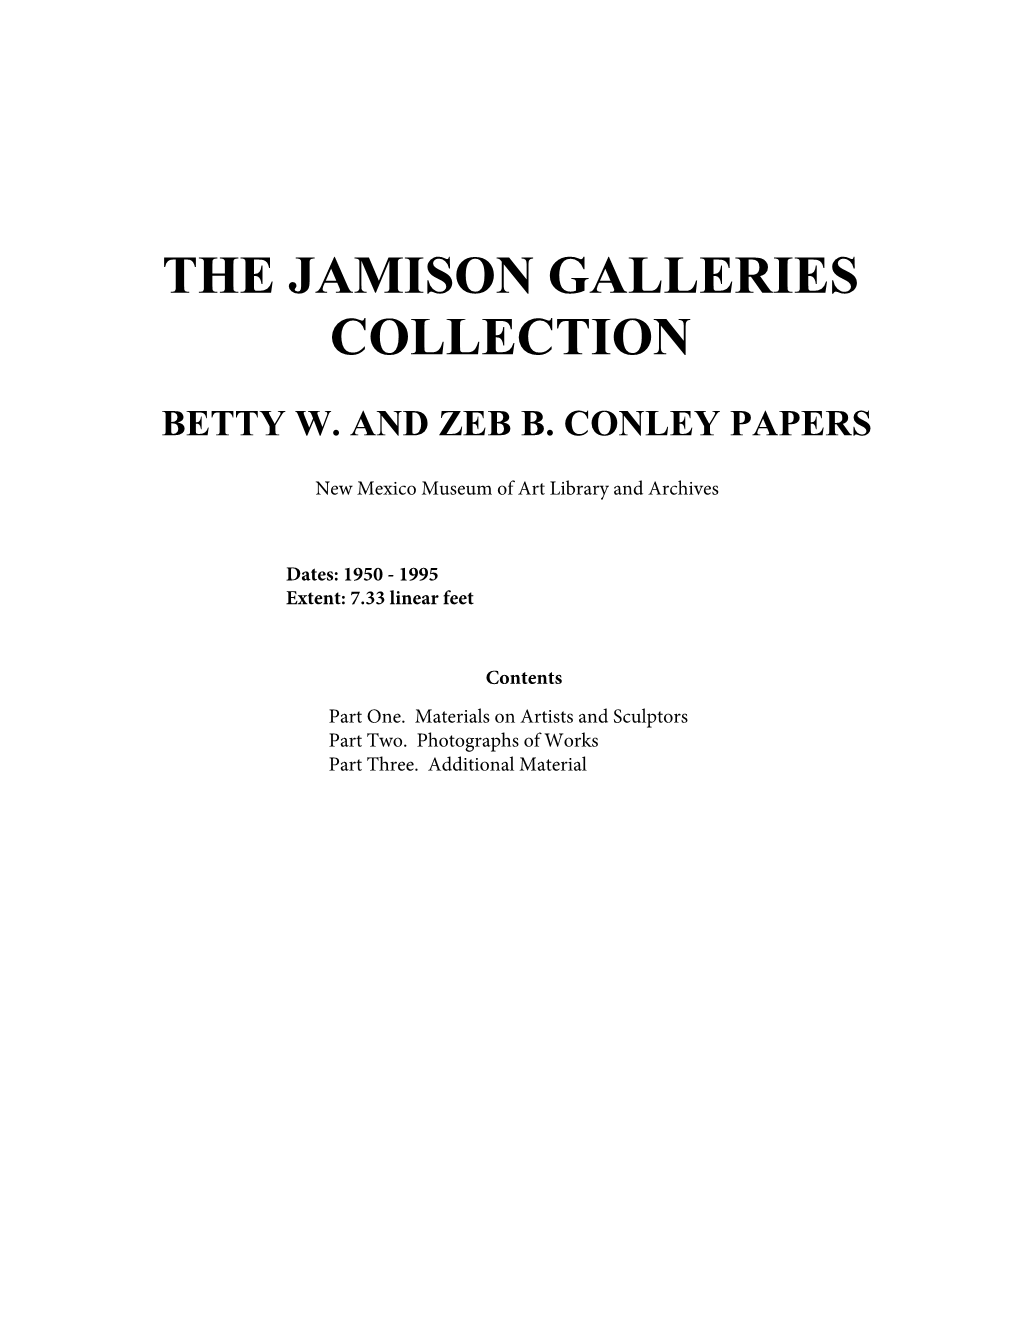 The Jamison Galleries Collection